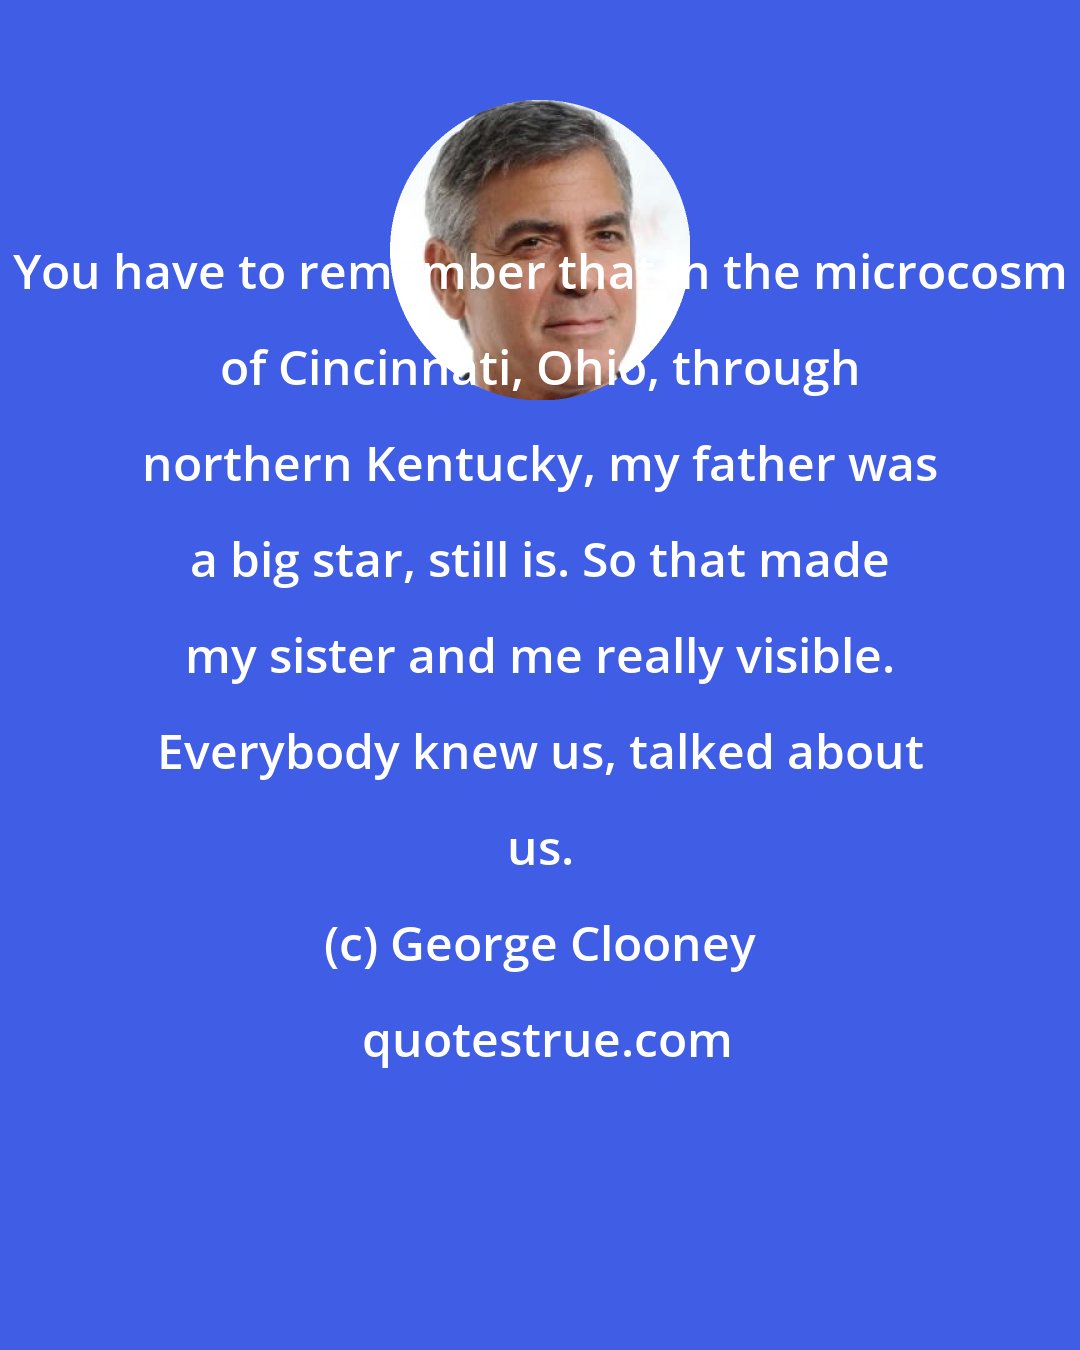 George Clooney: You have to remember that in the microcosm of Cincinnati, Ohio, through northern Kentucky, my father was a big star, still is. So that made my sister and me really visible. Everybody knew us, talked about us.